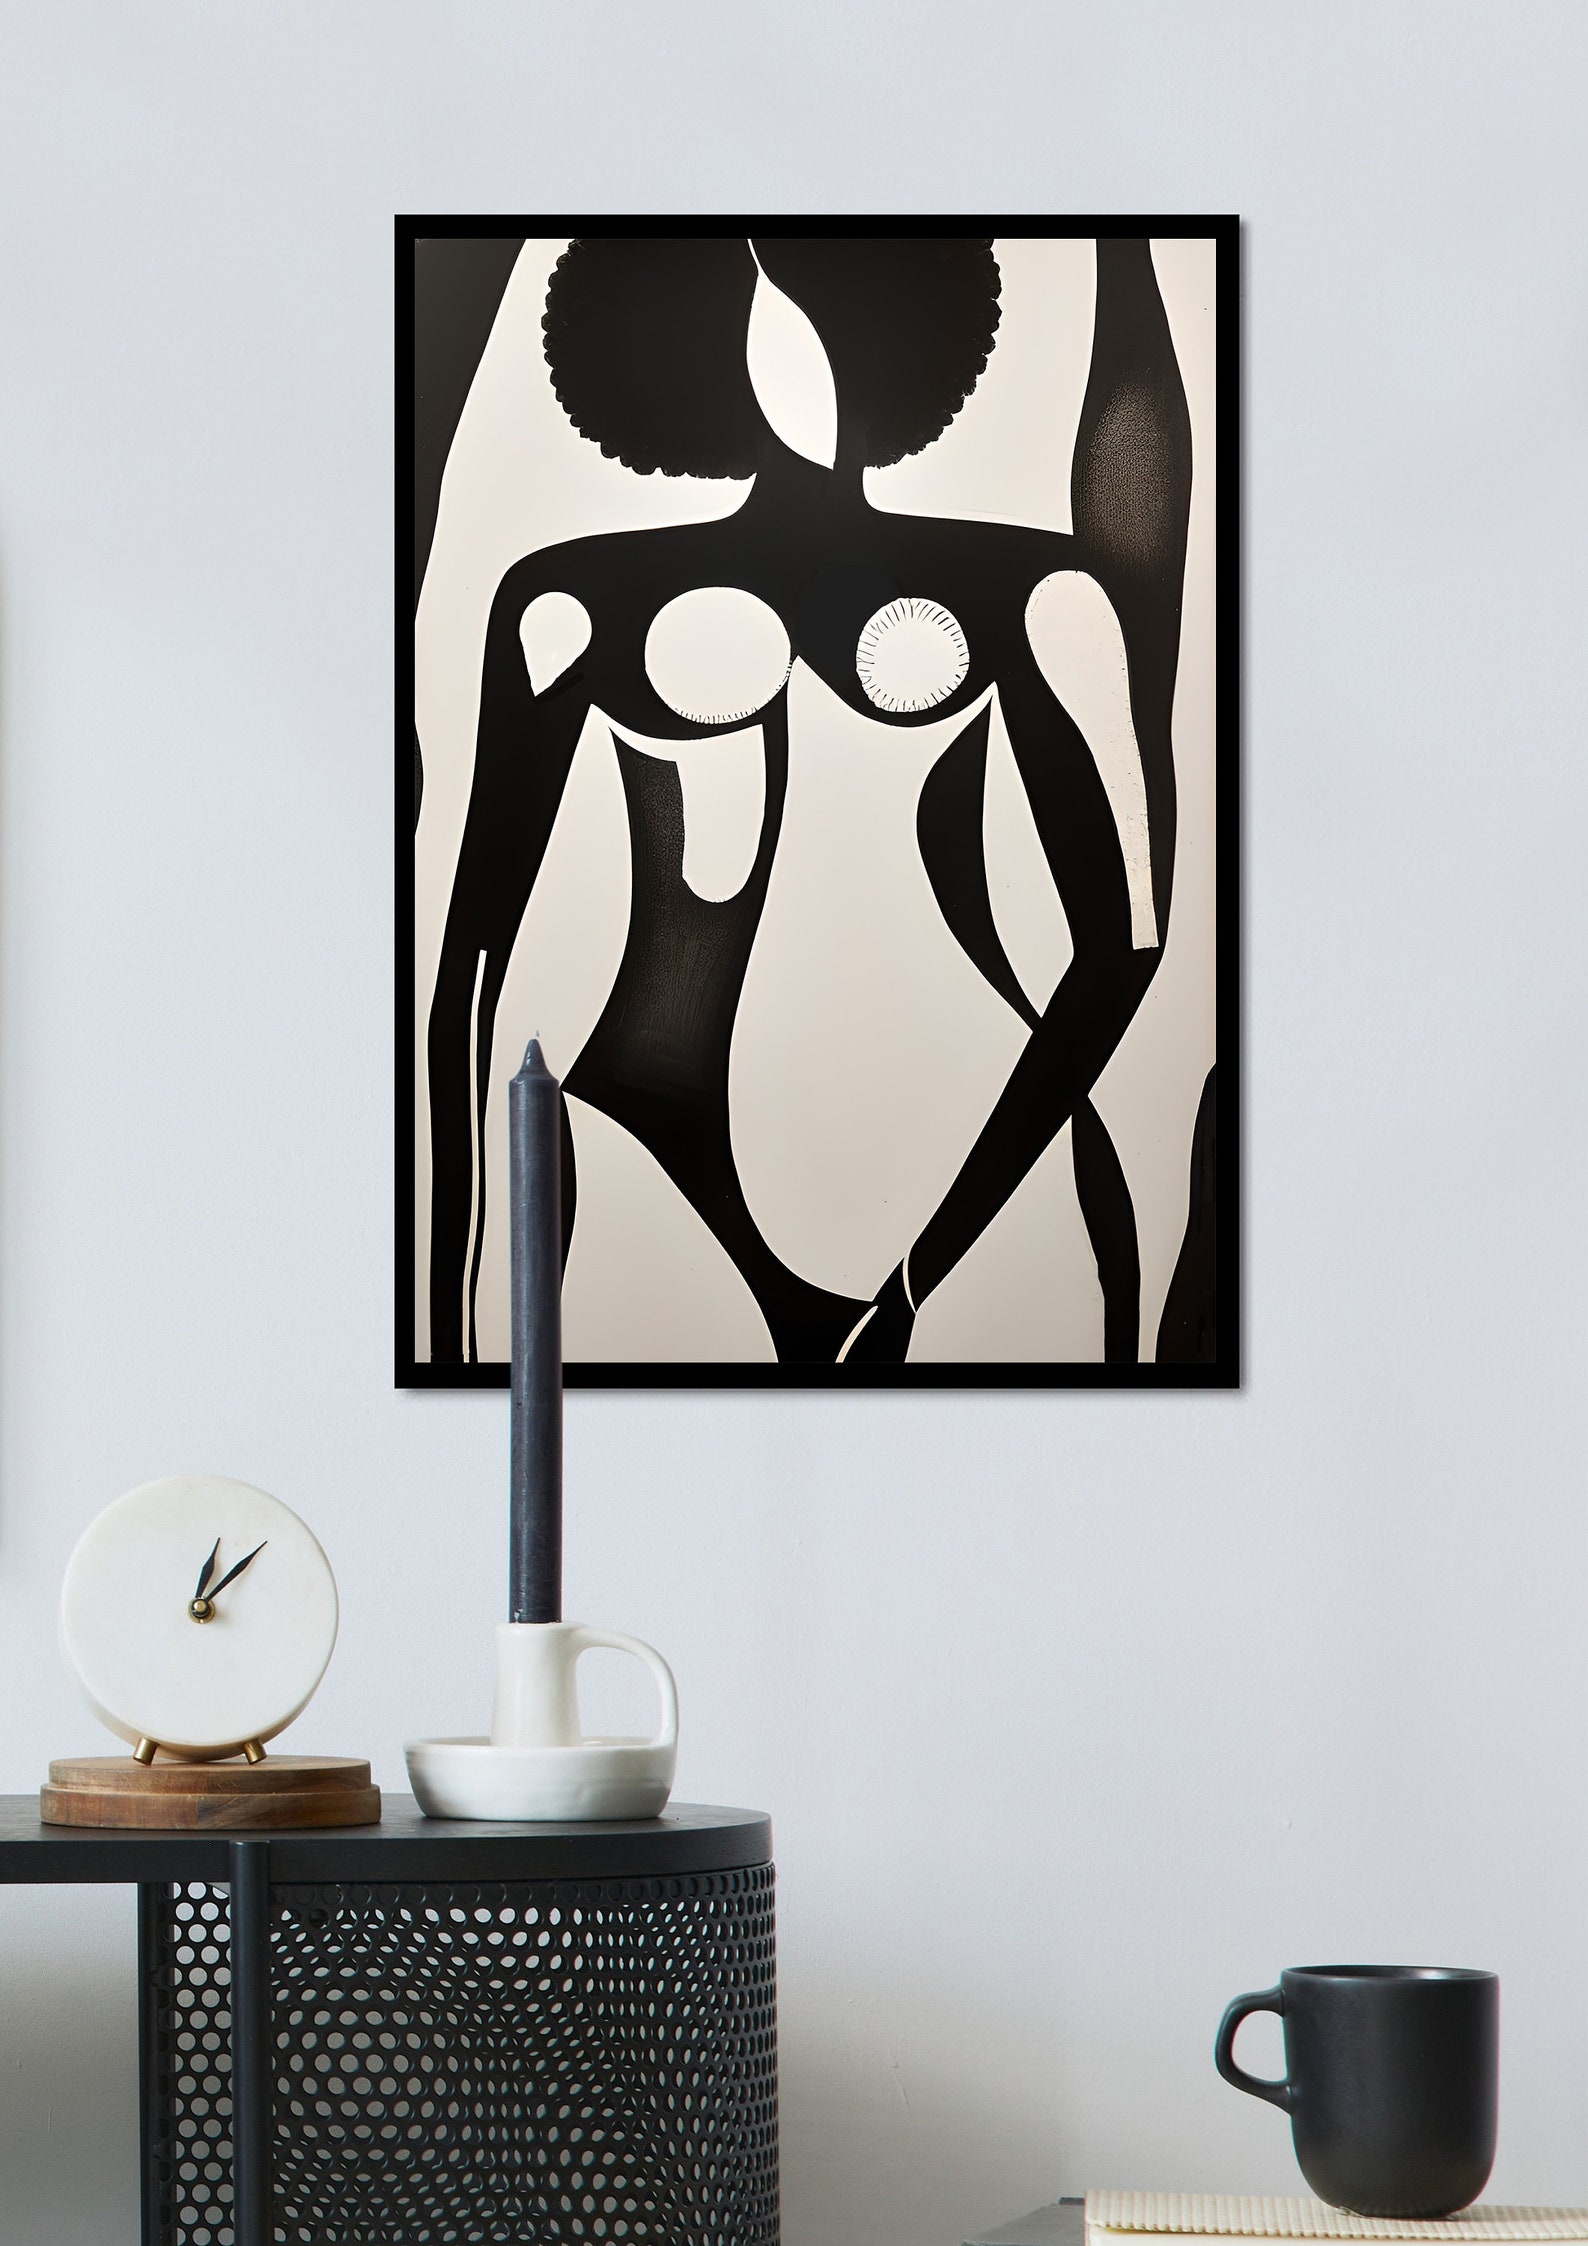 Black Woman Wall Art Black and White Abstract Art Female - Etsy